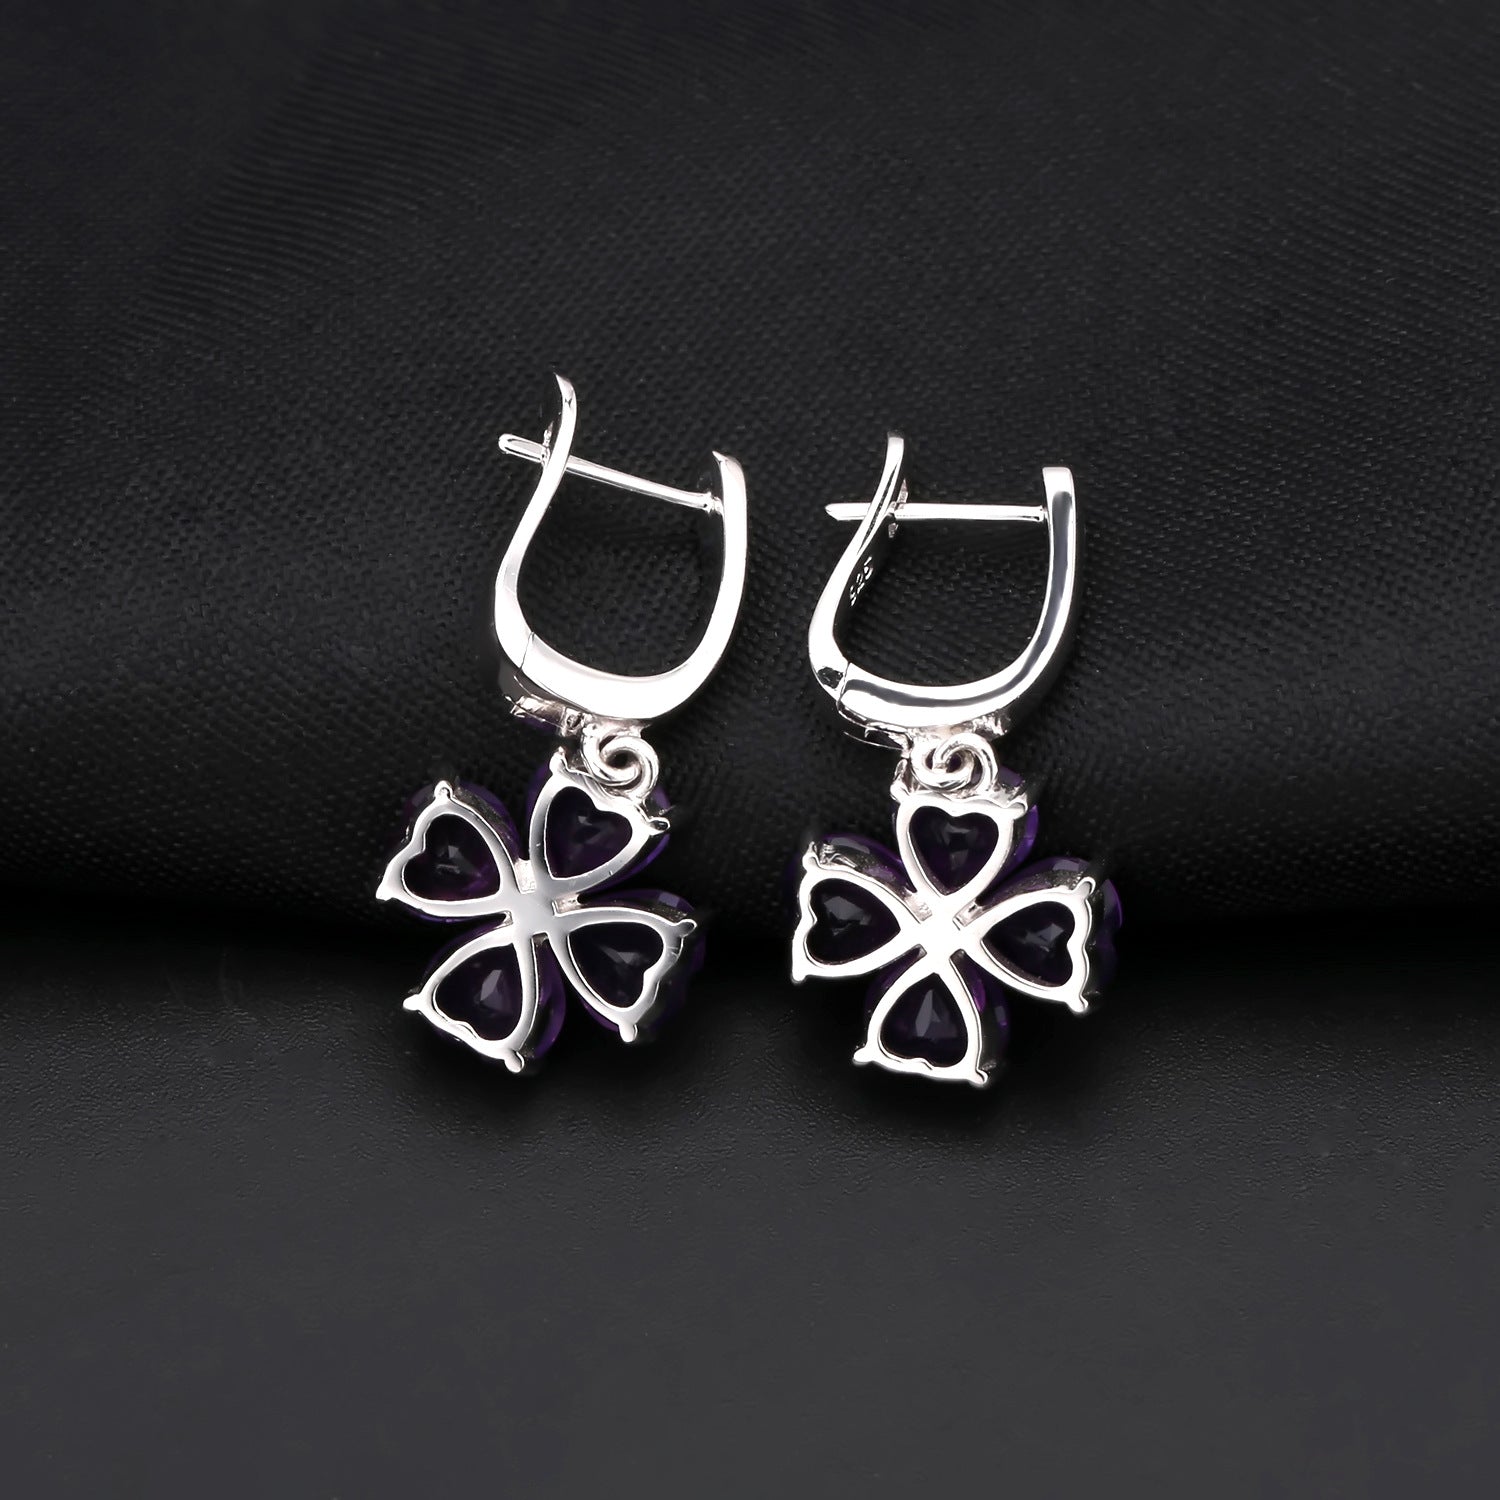 Natural Colourful Gemstone Clover Shape Silver Drop Earrings for Women